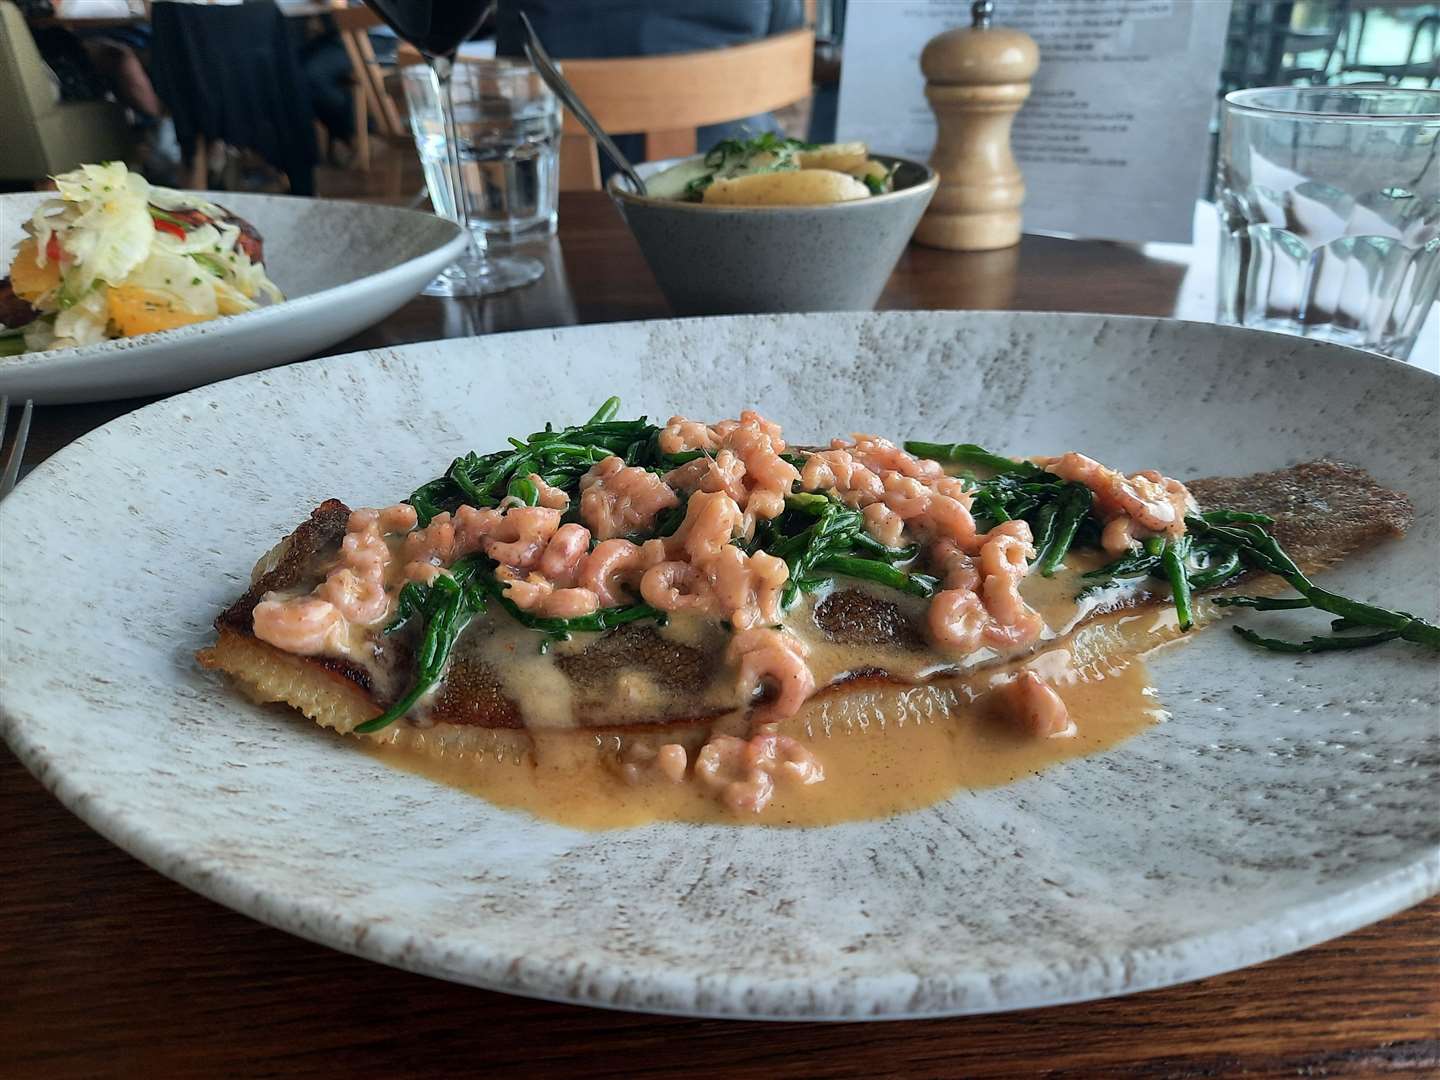 Our reporter ordered lemon sole, samphire and melted potted shrimp at Rocksalt in Folkestone during a trip to review the eatery in 2021